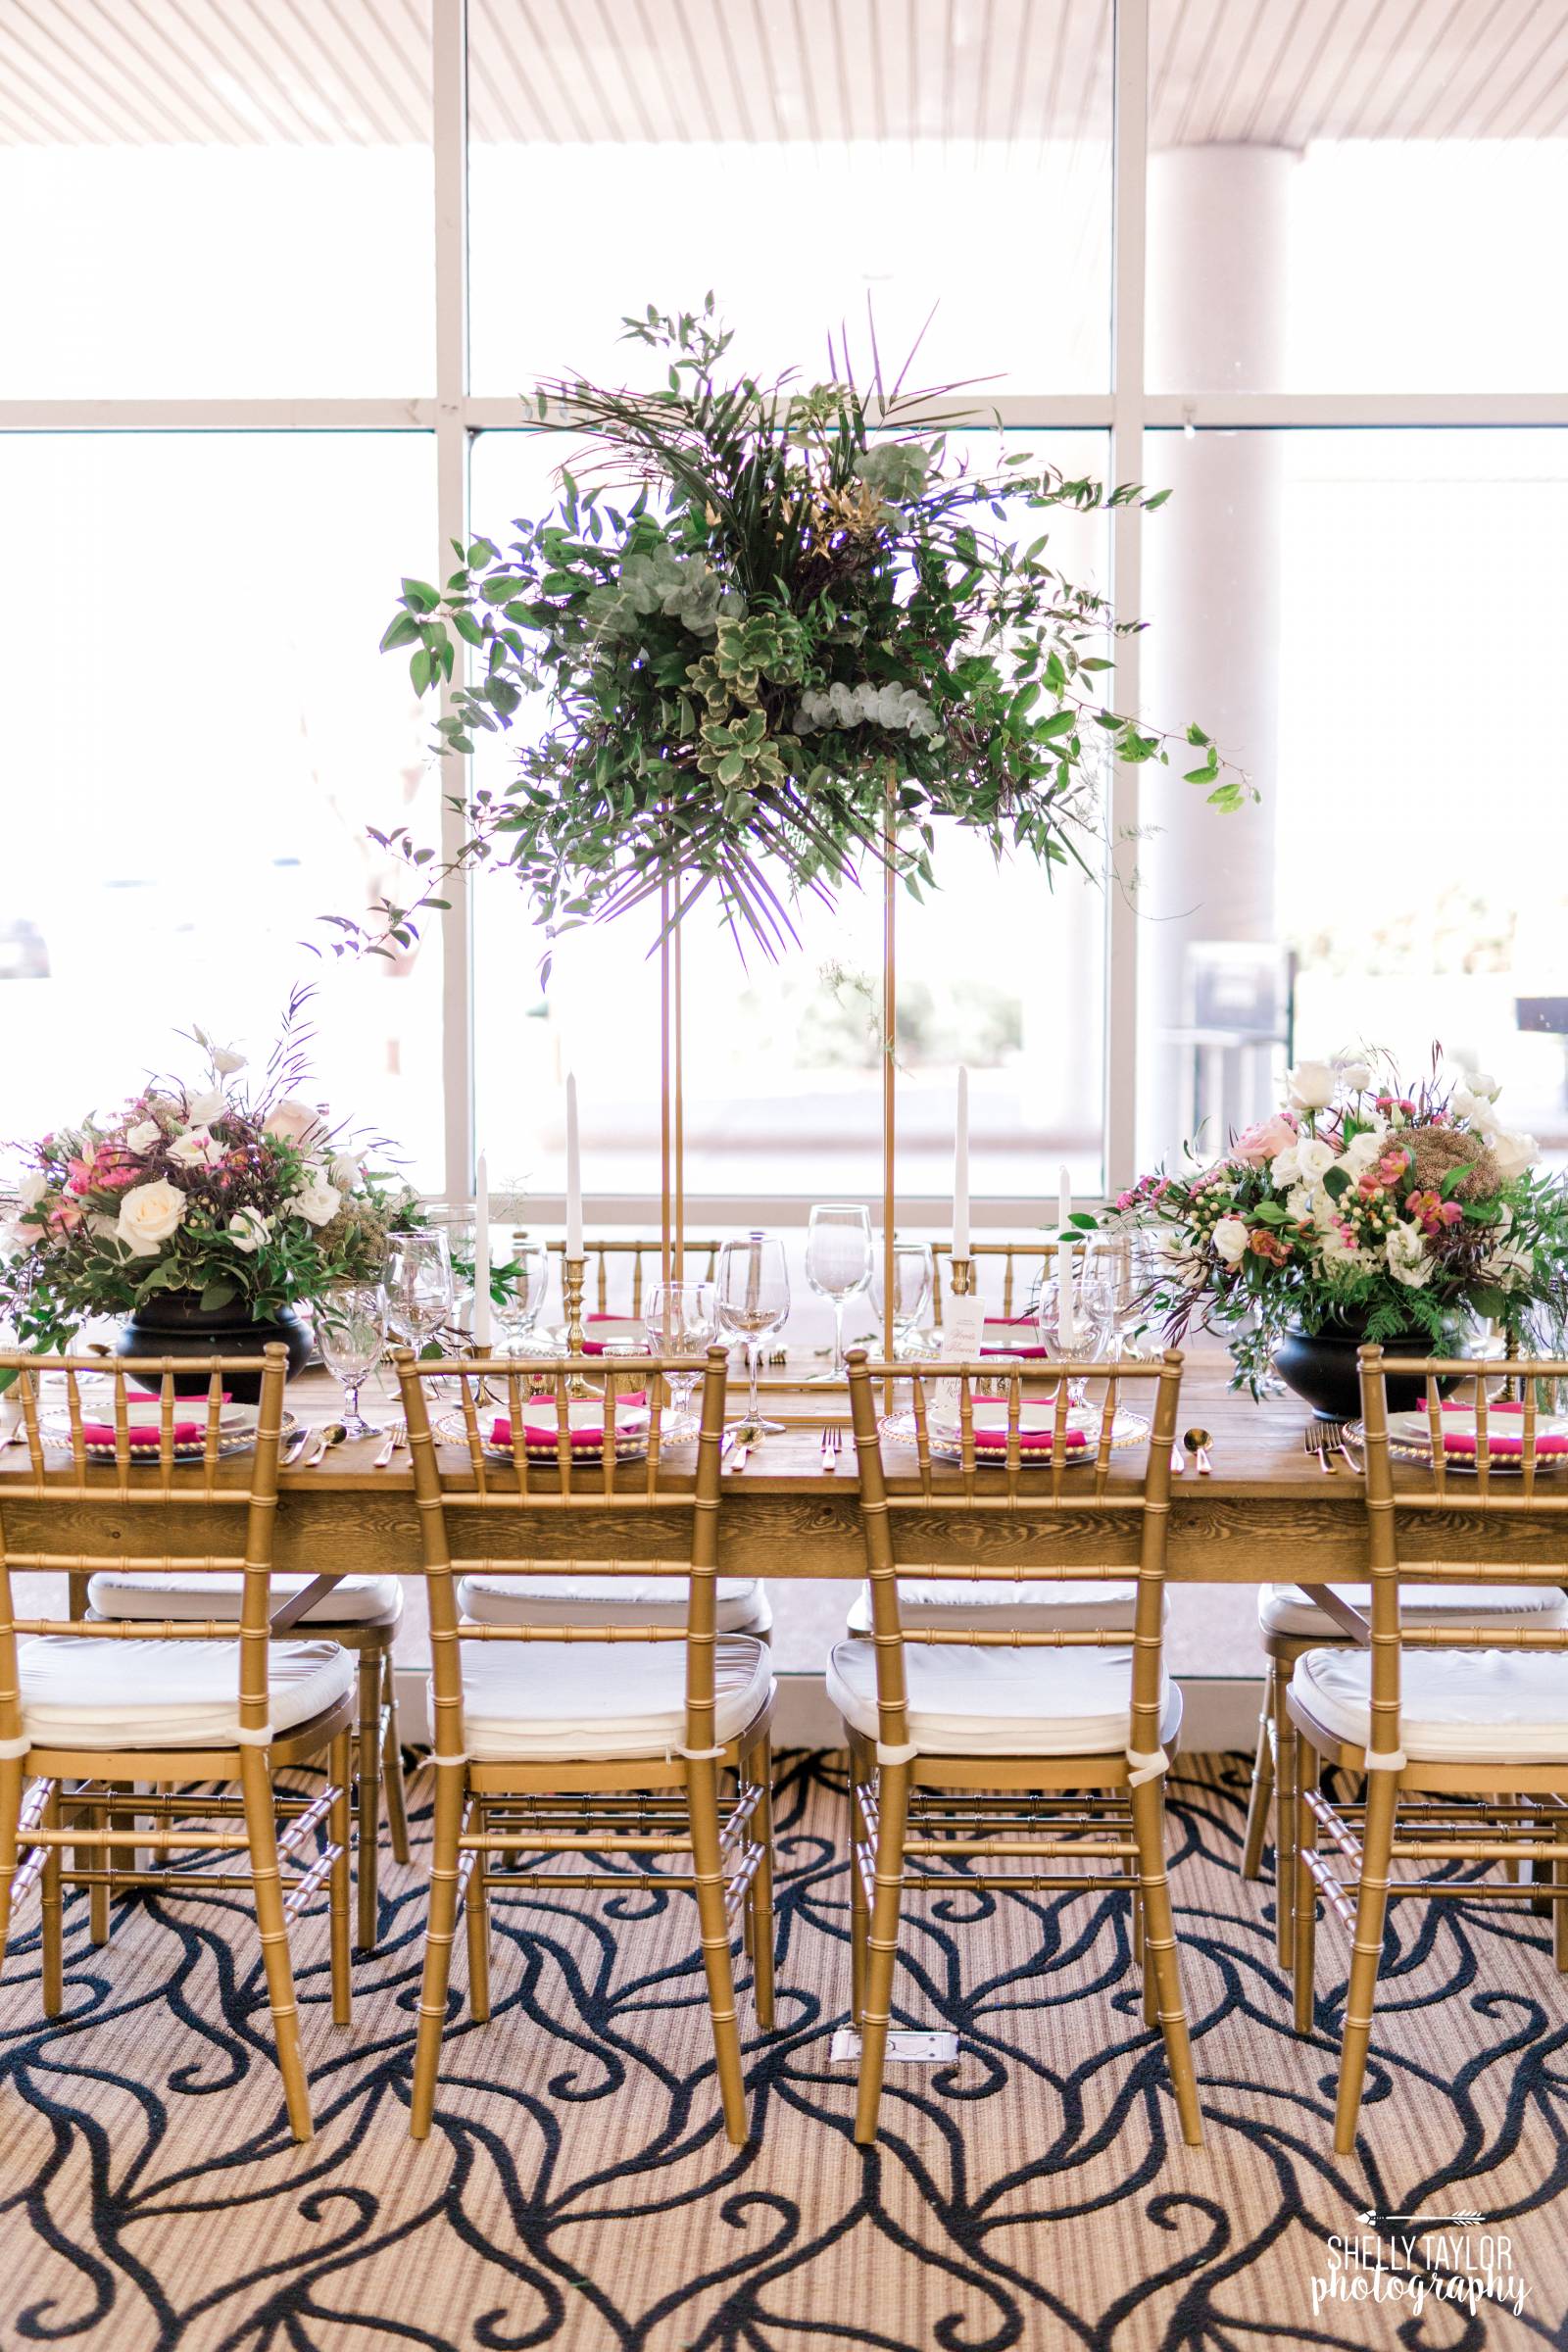 Headtable with tall centerpiece